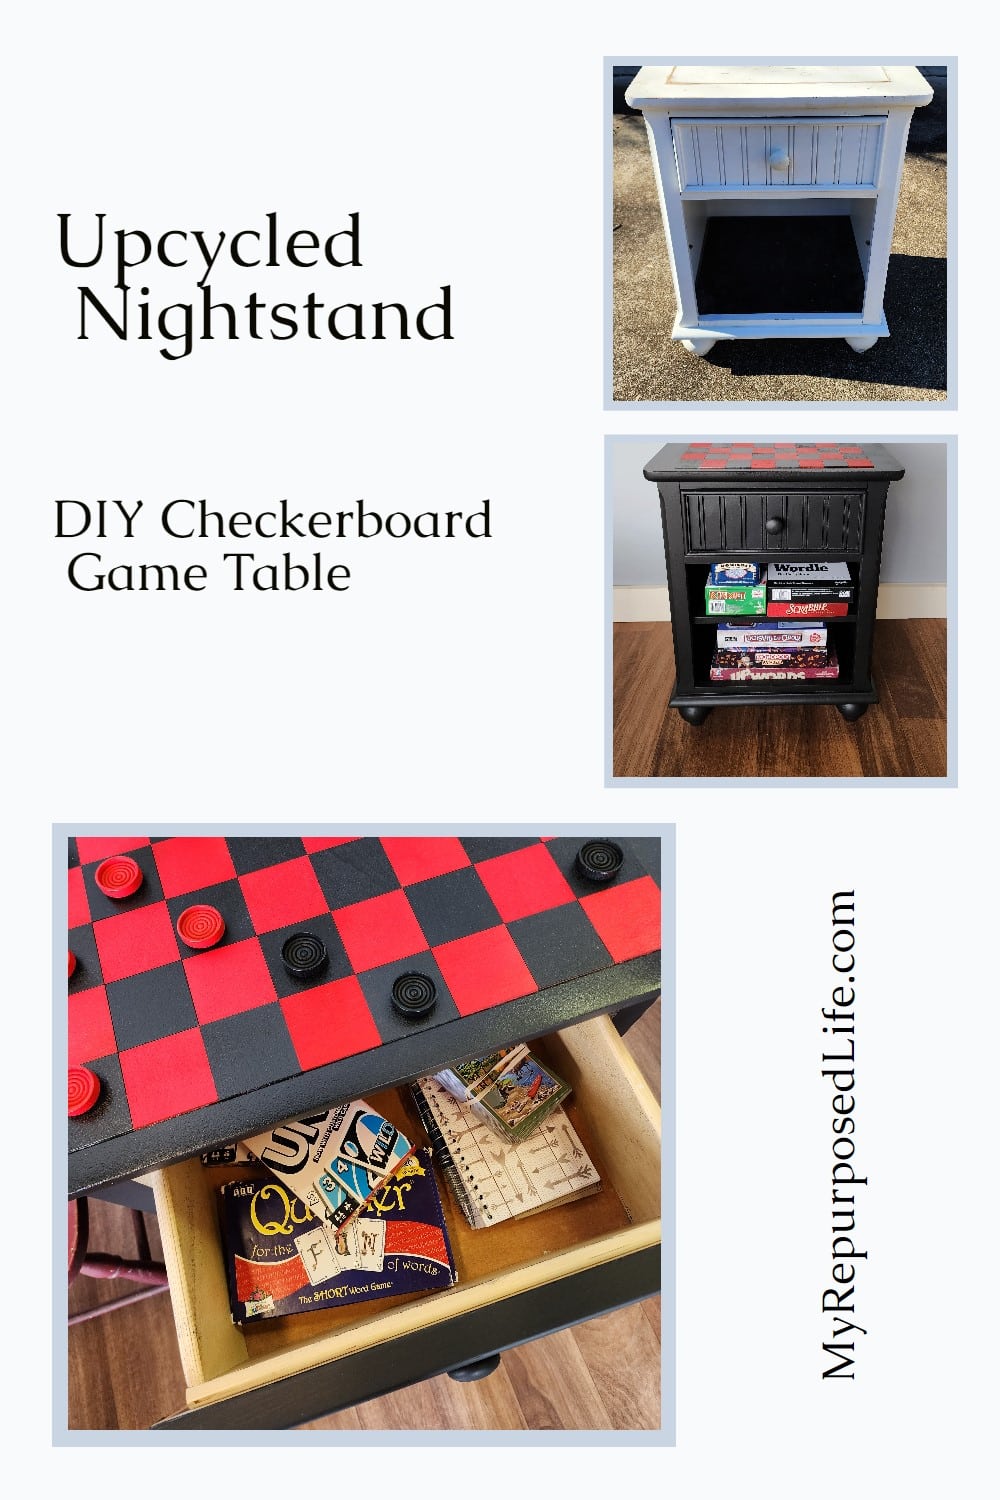 How to transform an old nightstand into a checkerboard game table. With a shelf and a drawer the storage is plentiful for storing games, checkers and more. #MyRepurposedLife #gametable #diy via @repurposedlife